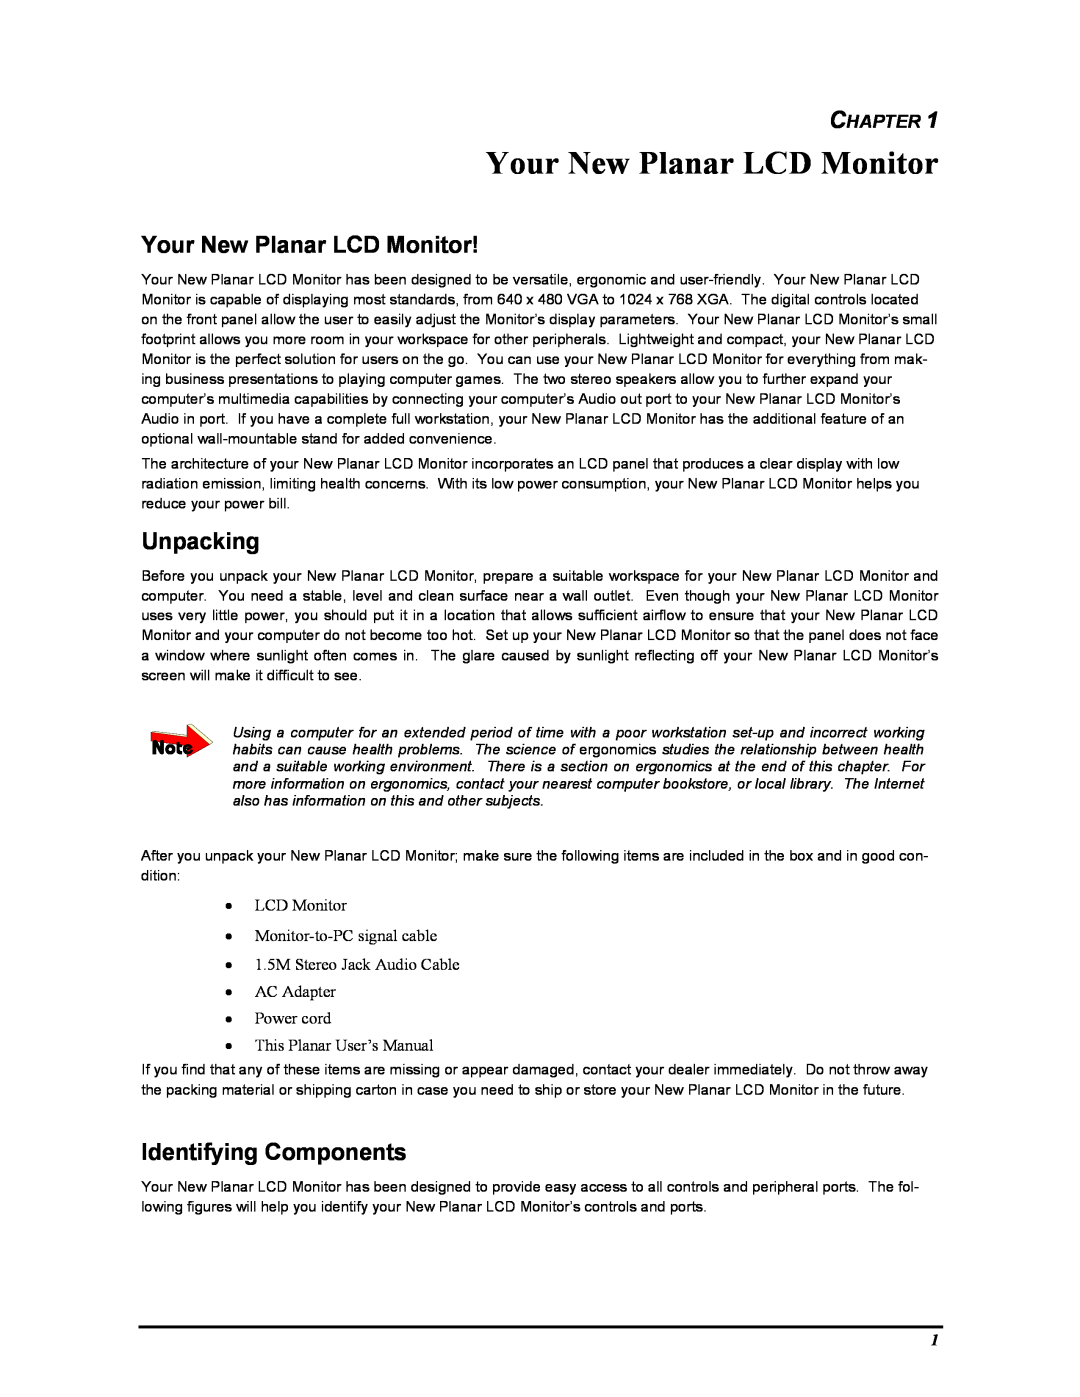 Planar PV150 manual Your New Planar LCD Monitor, Unpacking, Identifying Components, Chapter 